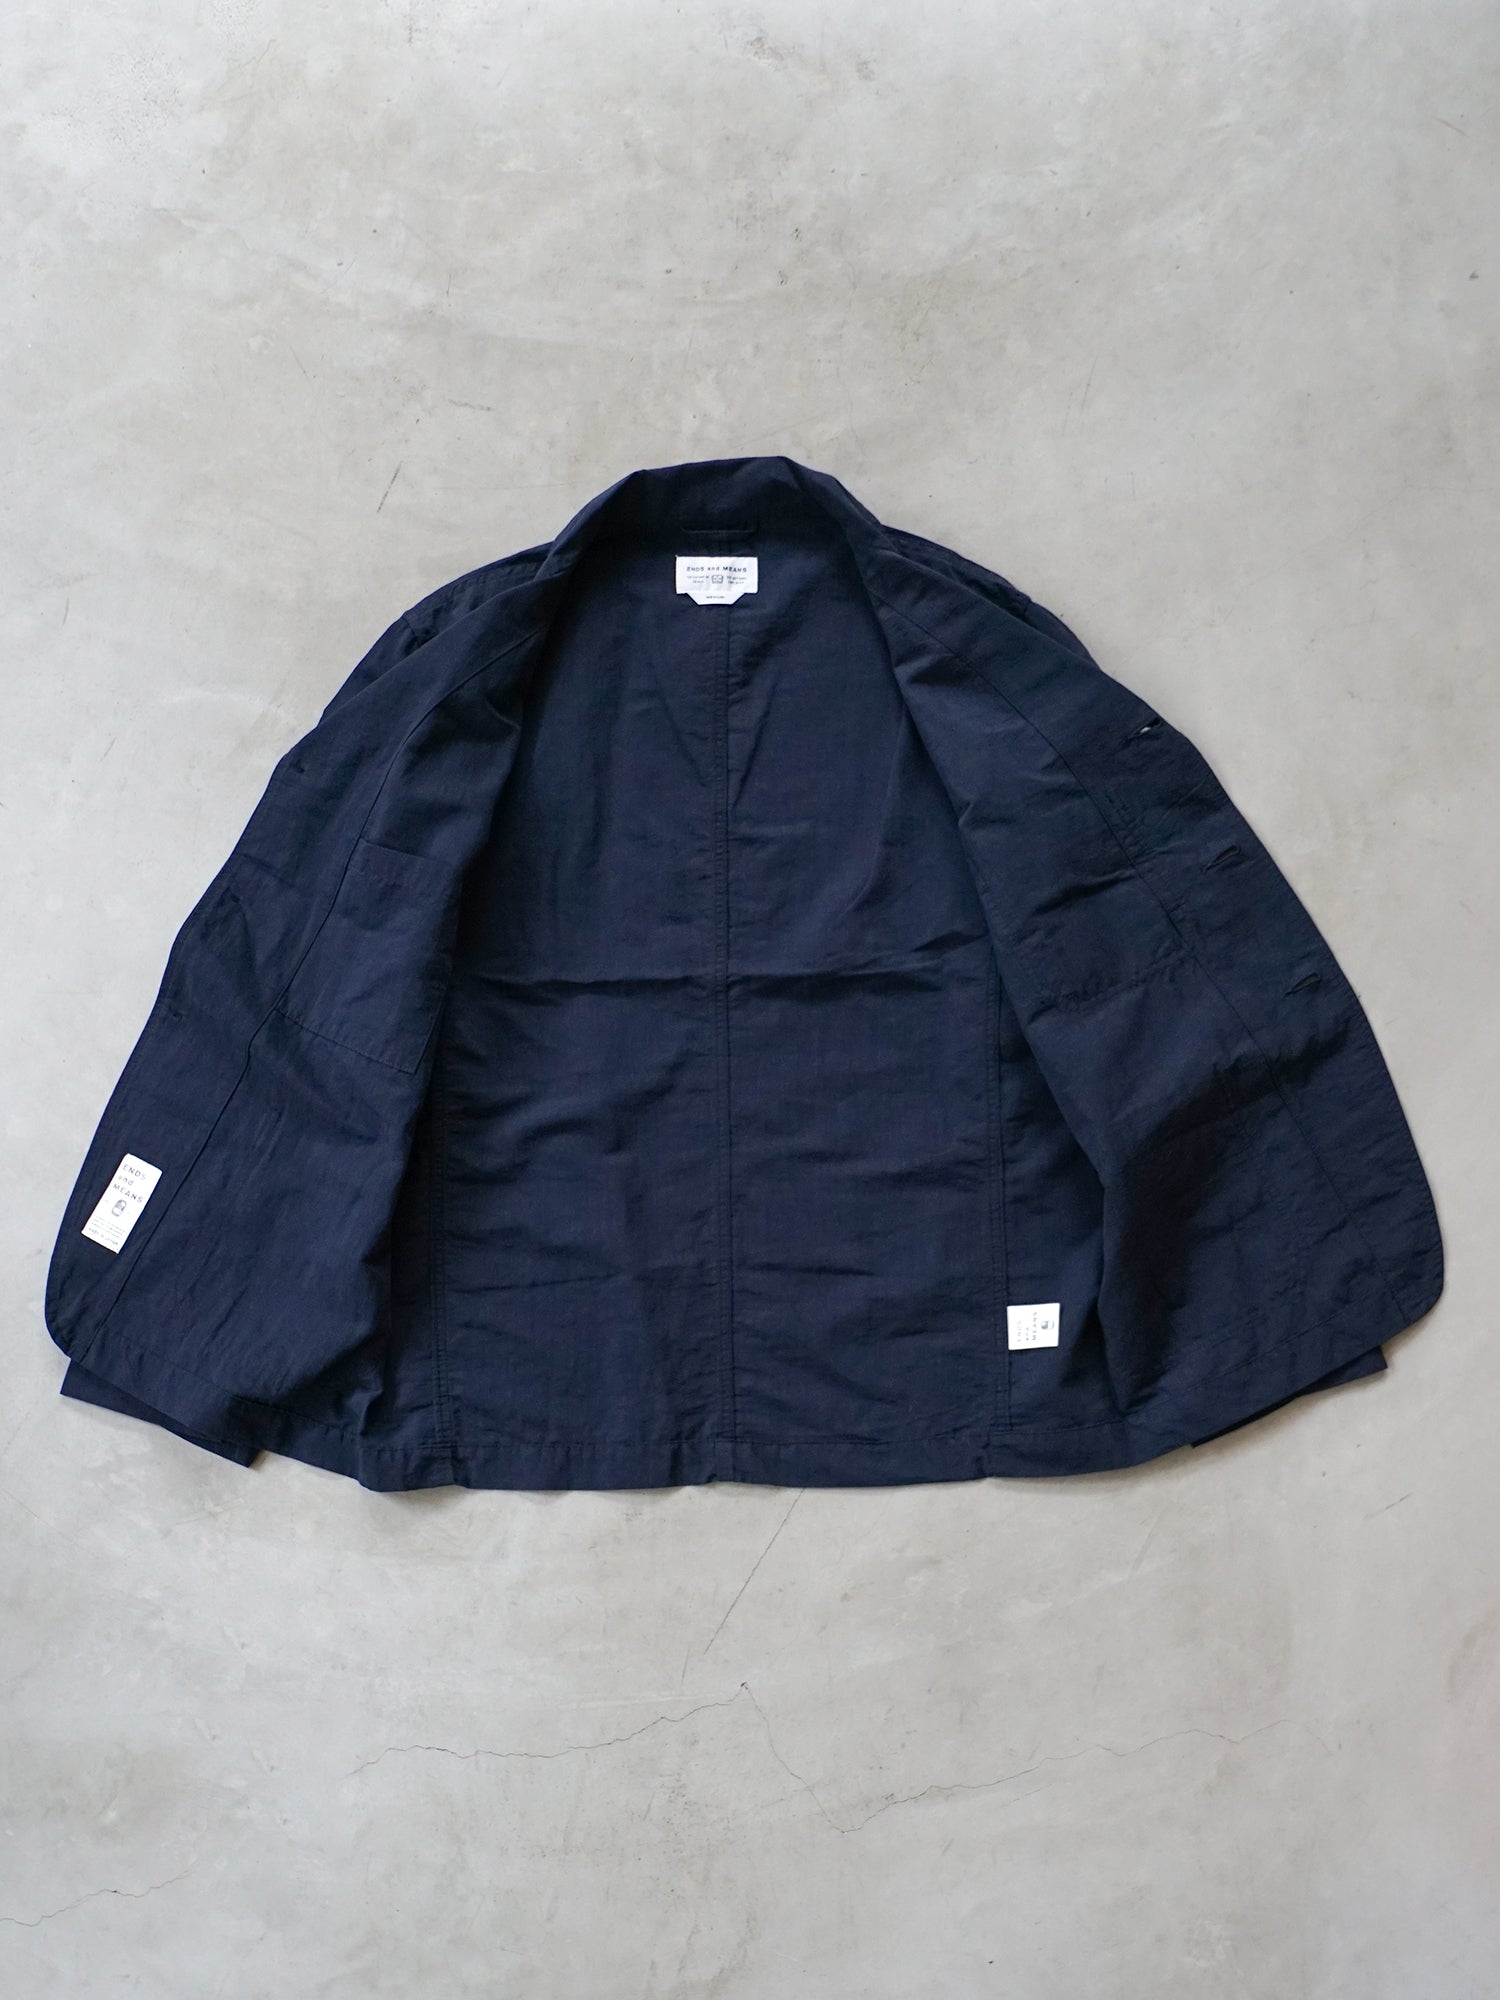 ENDS and MEANS Work Jacket – CUXTON HOUSE